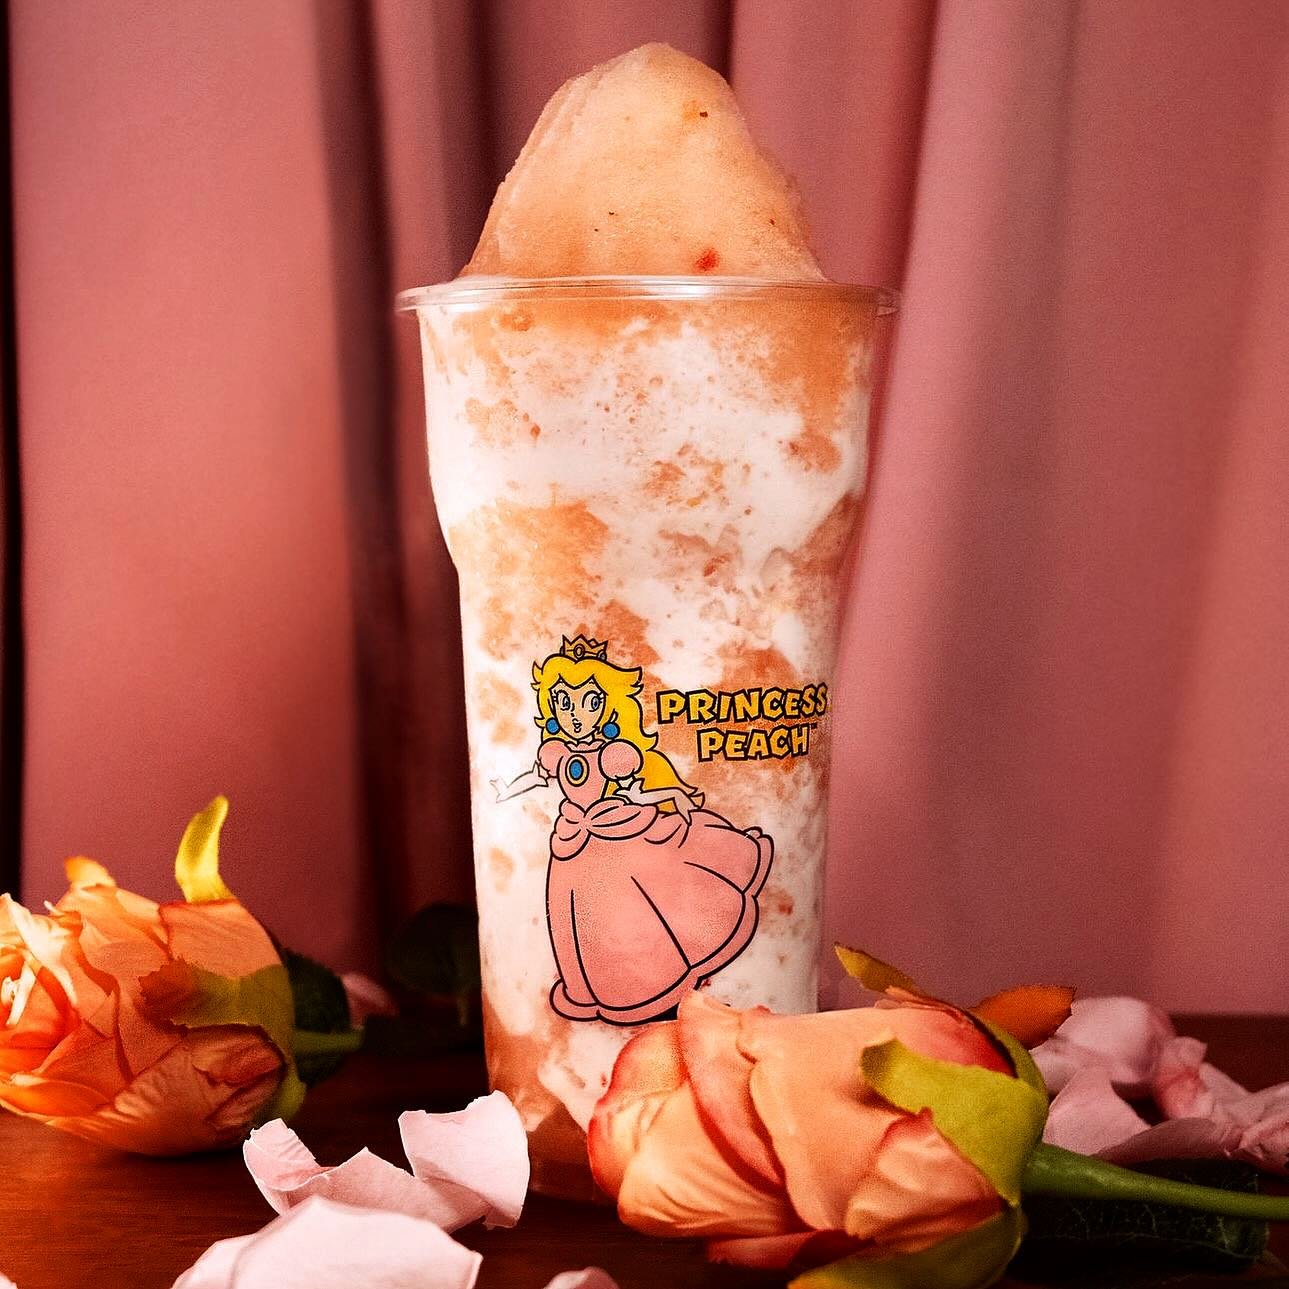 Sipping on sweetness fit for royalty 👸🏼Try the new Princess Peaches &amp; cream drink @kungfuteausa 
.
.
.
#kungfutea #kftea #kfteausa #peachesandcream #bobatea #bobalove #bobalife #flushingeats #flushingfoodie #flushingqueens #downtownflushing #fl